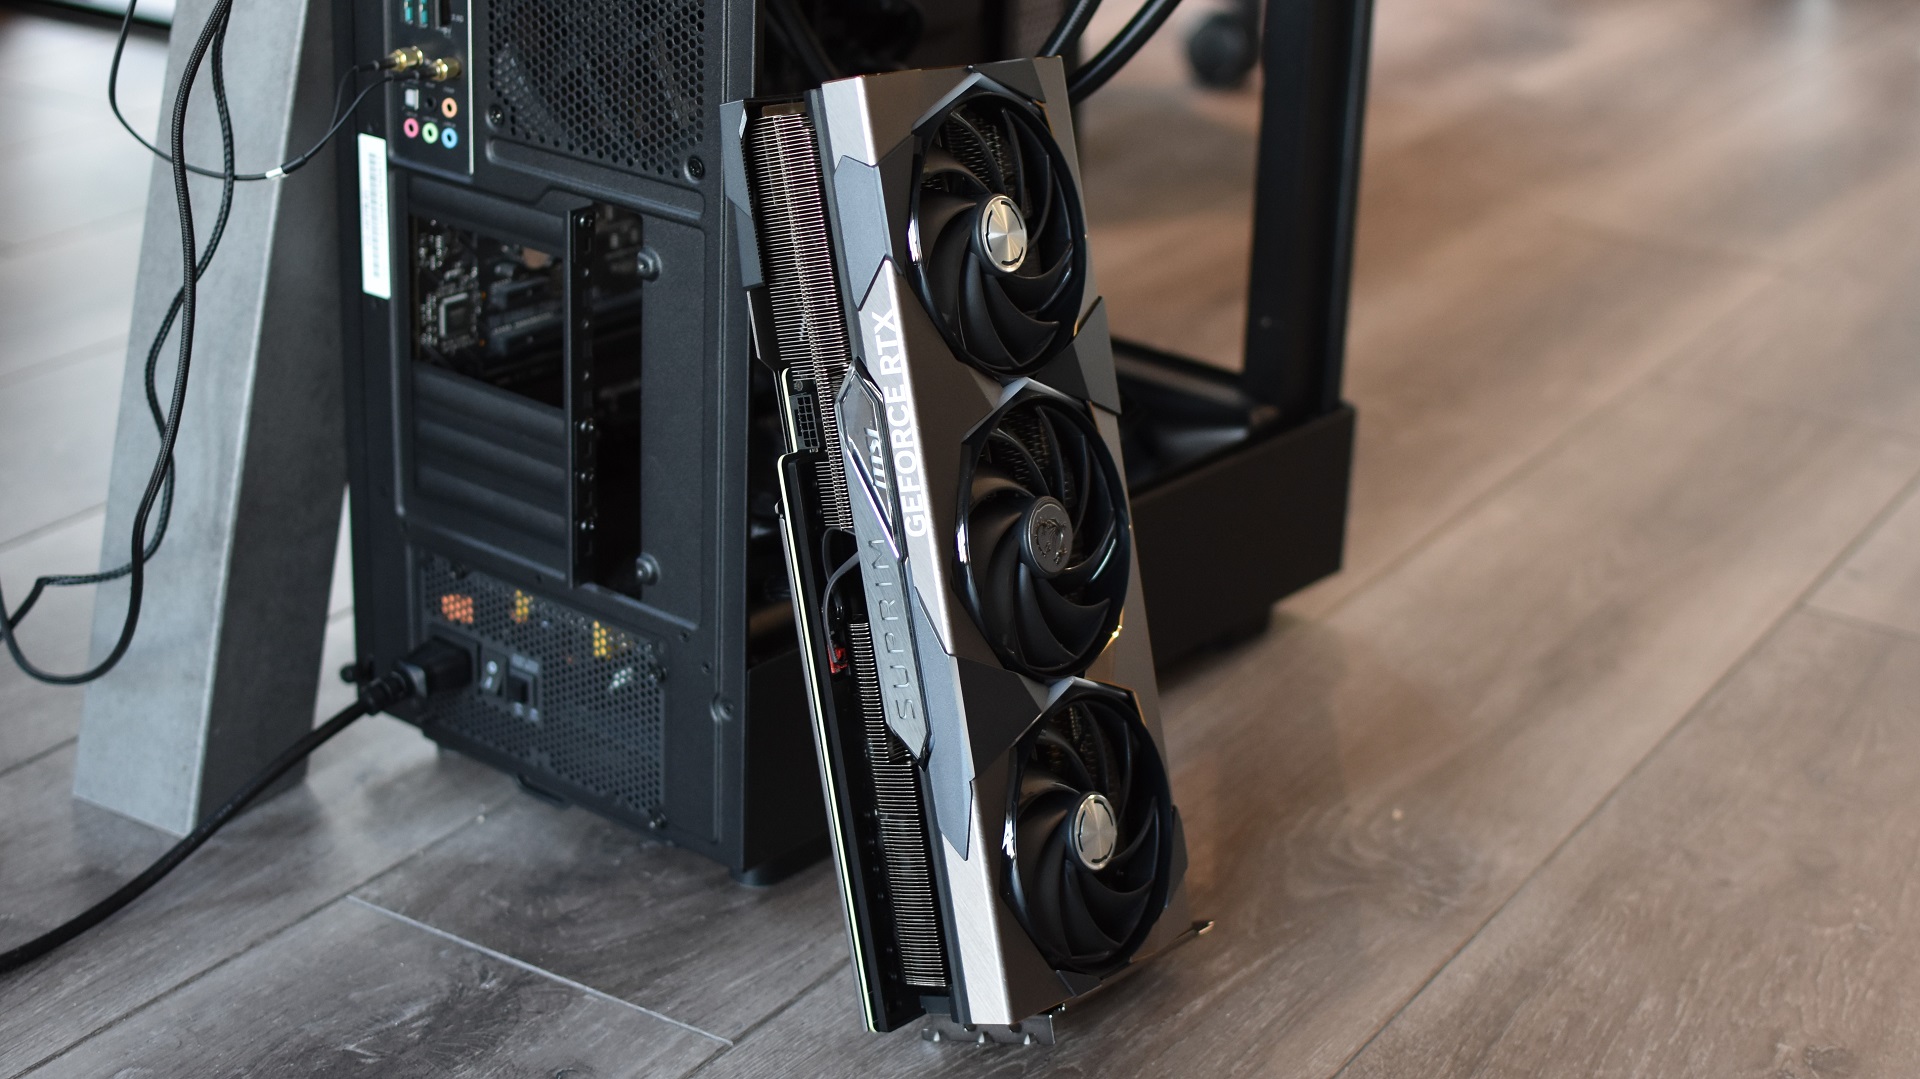 The MSI GeForce RTX 4070 Ti Suprim X 12G graphics card leaning against a PC case.